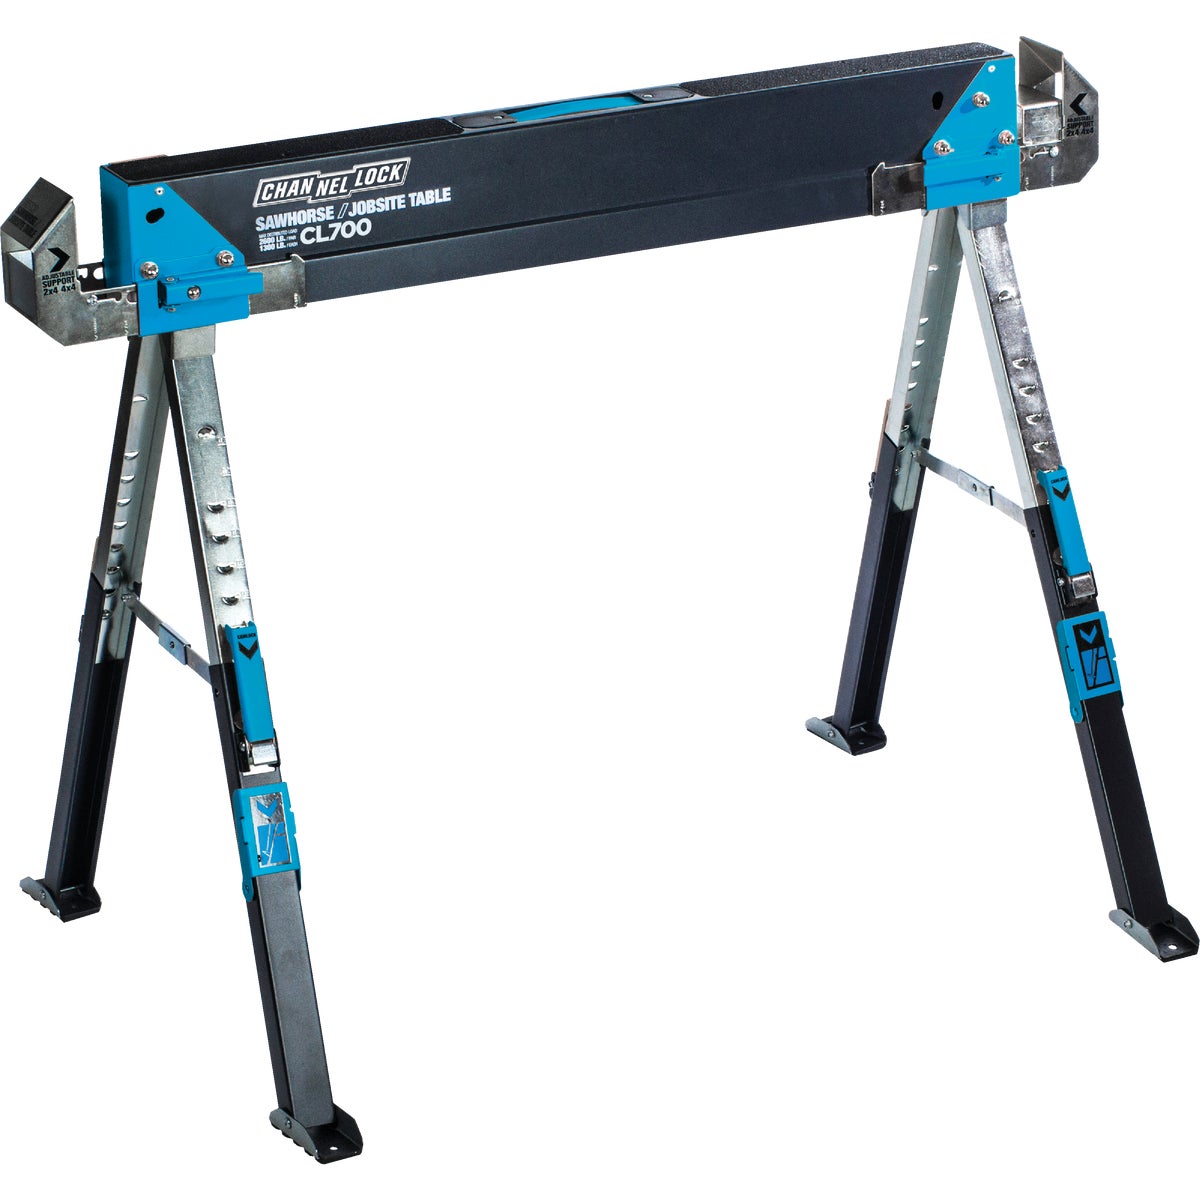 Item 300013, Maximize your worksite efficiency with the Channellock Adjustable Sawhorse